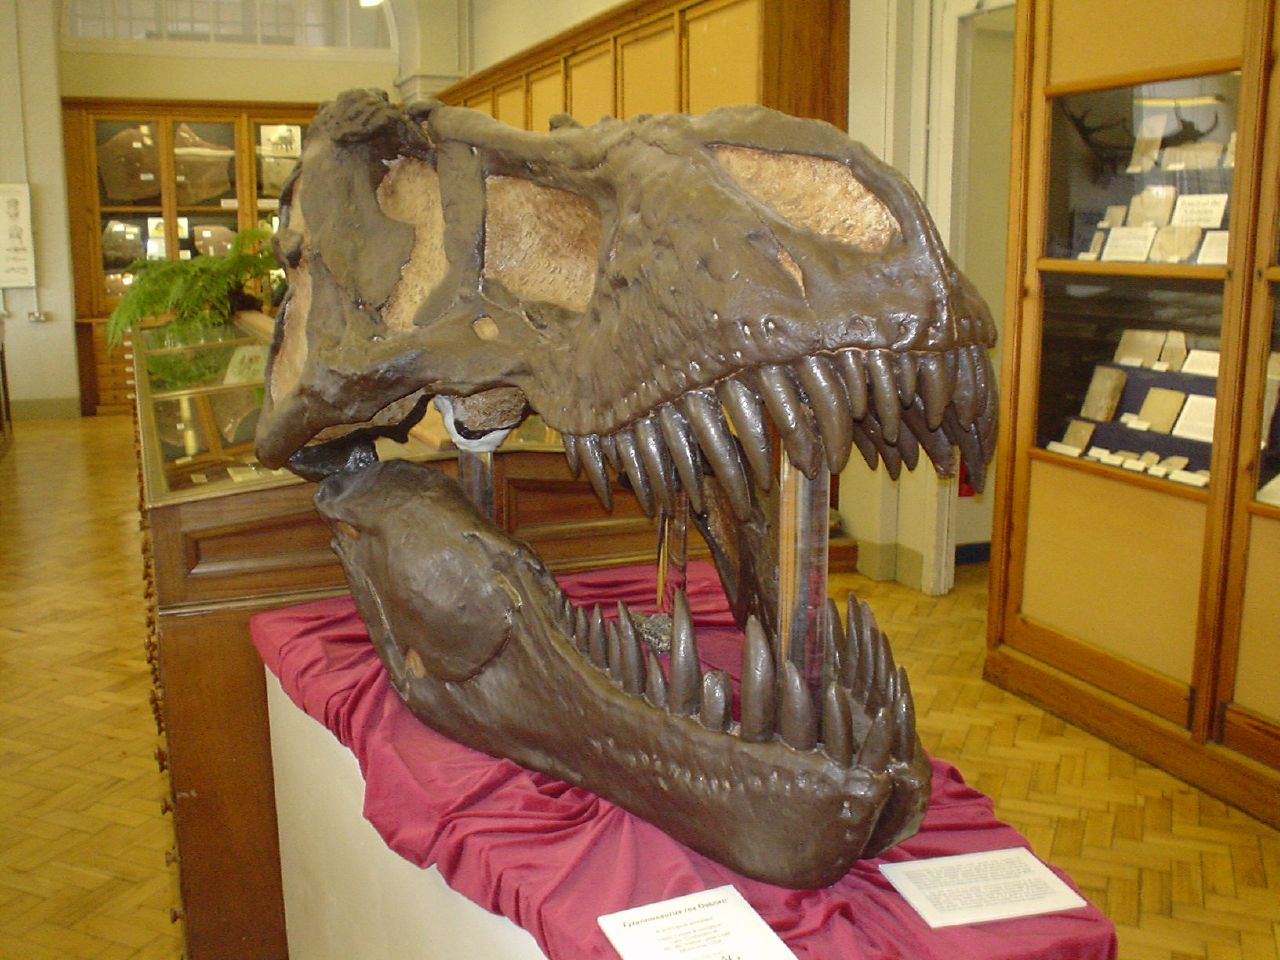 a dinosaur skeleton sitting on display in a museum